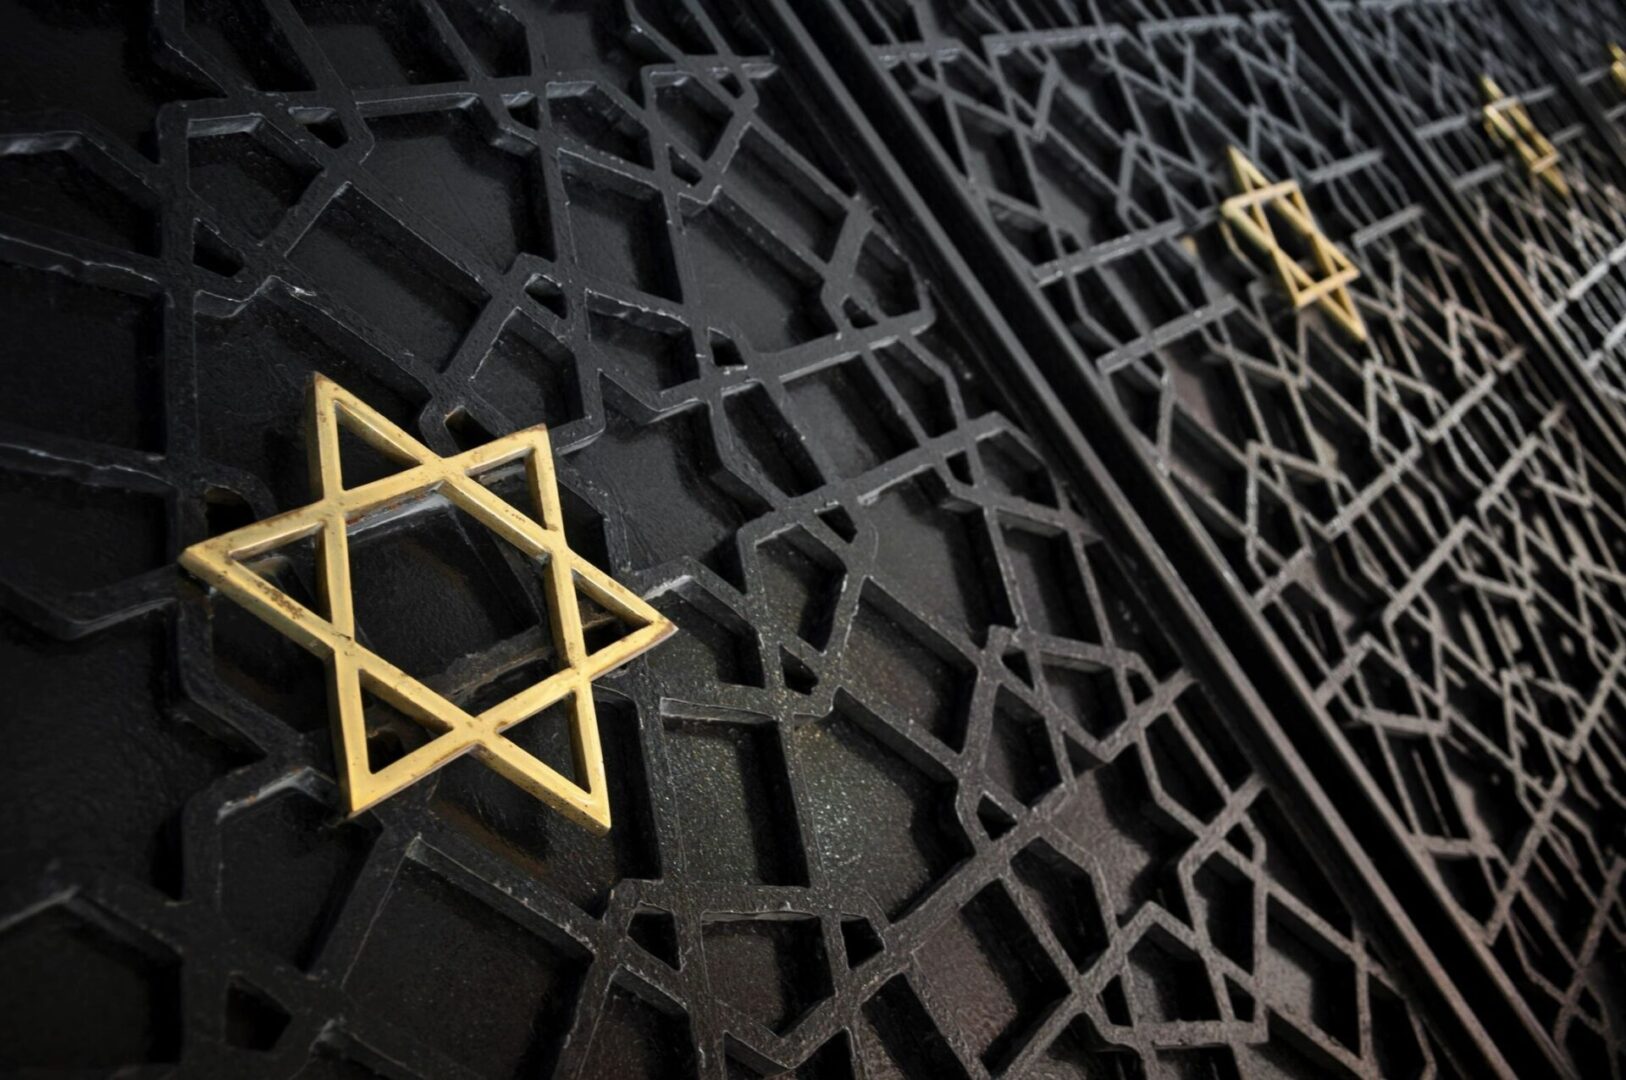 A close up of two star of david decorations